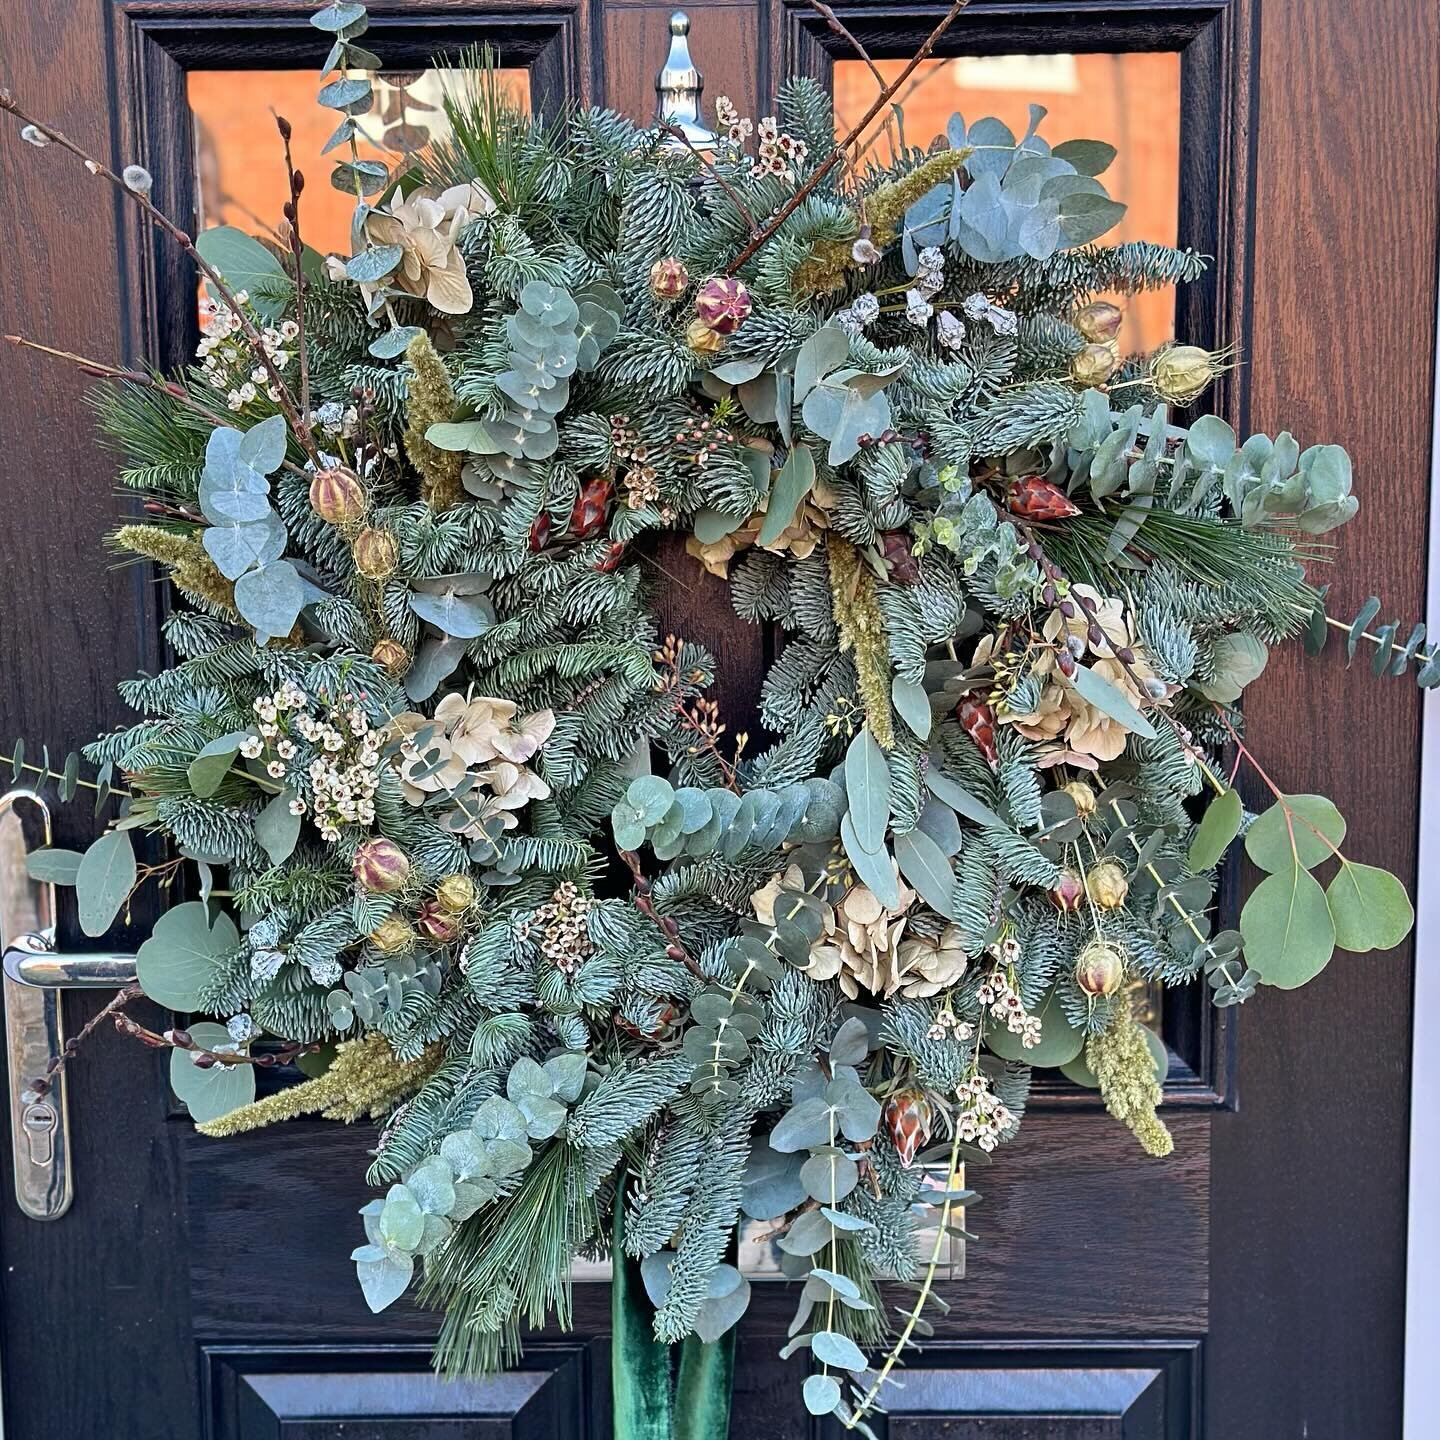 This wreath, with subtle green and silver tones, was delivered to a home in Ampthill on Friday 🙌

Fed up of wreaths yet? 😂 I&rsquo;m not, but ask me again at the end of next week 😂. Doing my own signals the end of wreath-making for me&hellip; hopi